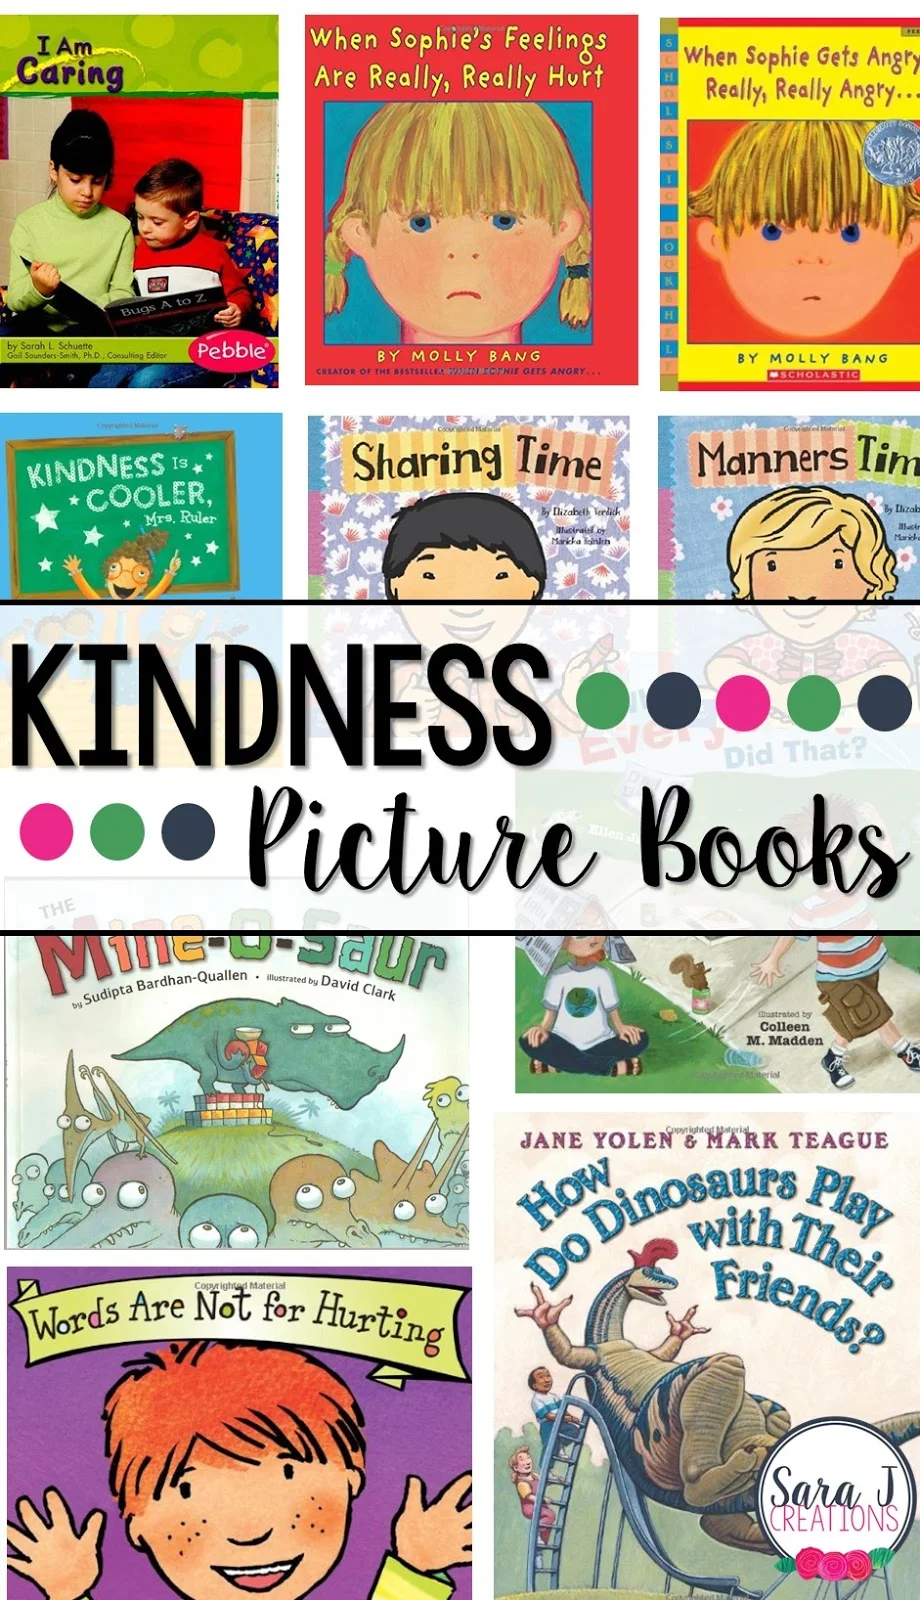 10 great picture books for teaching young children about kindness